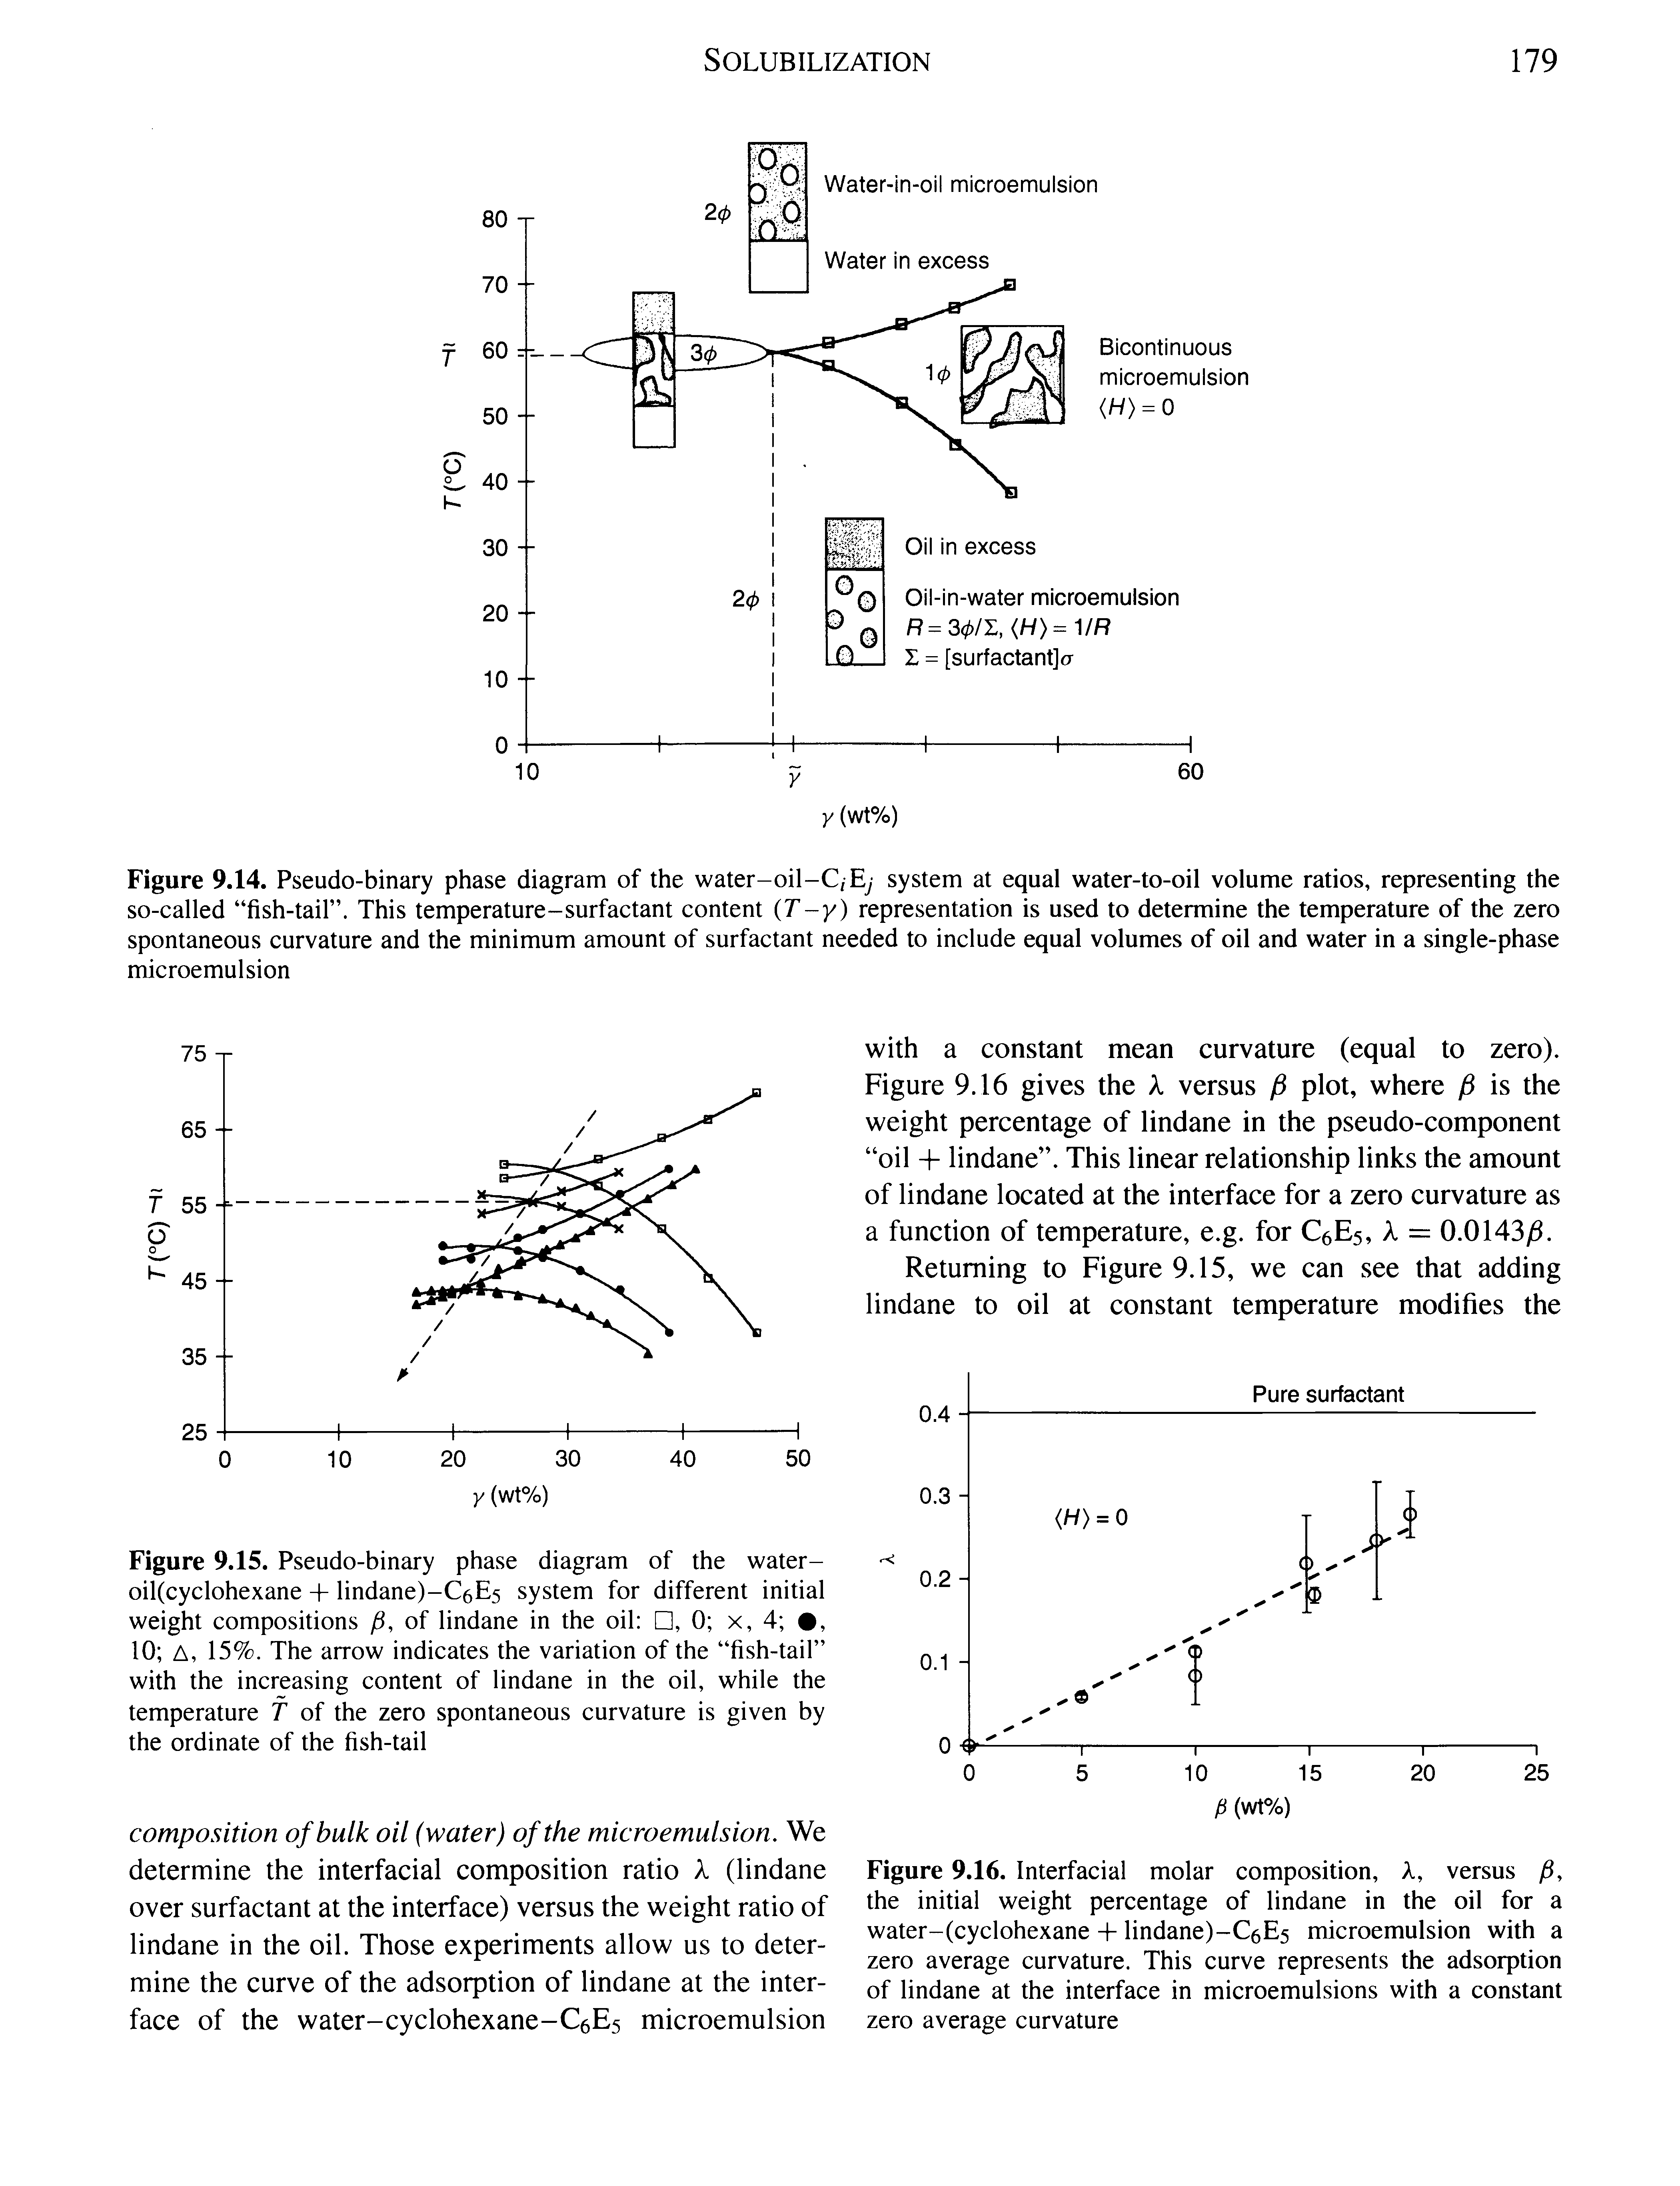 Figure 9.15. Pseudo-binary phase diagram of the water-oil(cyclohexane - - lindane)-C6E5 system for different initial weight compositions of lindane in the oil , 0 x, 4 , 10 A, 15%. The arrow indicates the variation of the fish-tail with the increasing content of lindane in the oil, while the temperature T of the zero spontaneous curvature is given by the ordinate of the fish-tail...